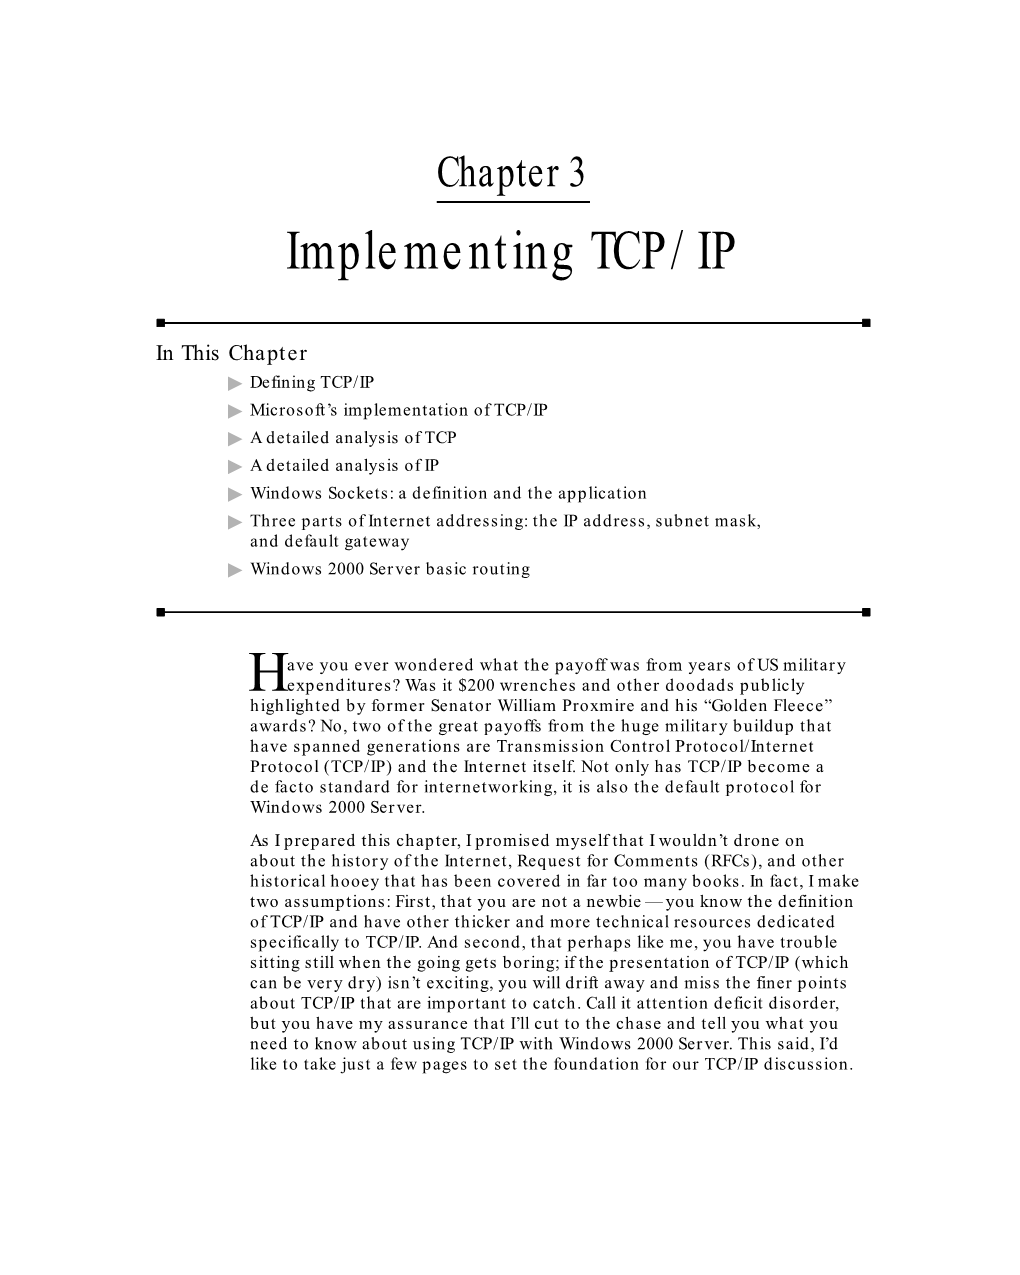 Implementing TCP/IP